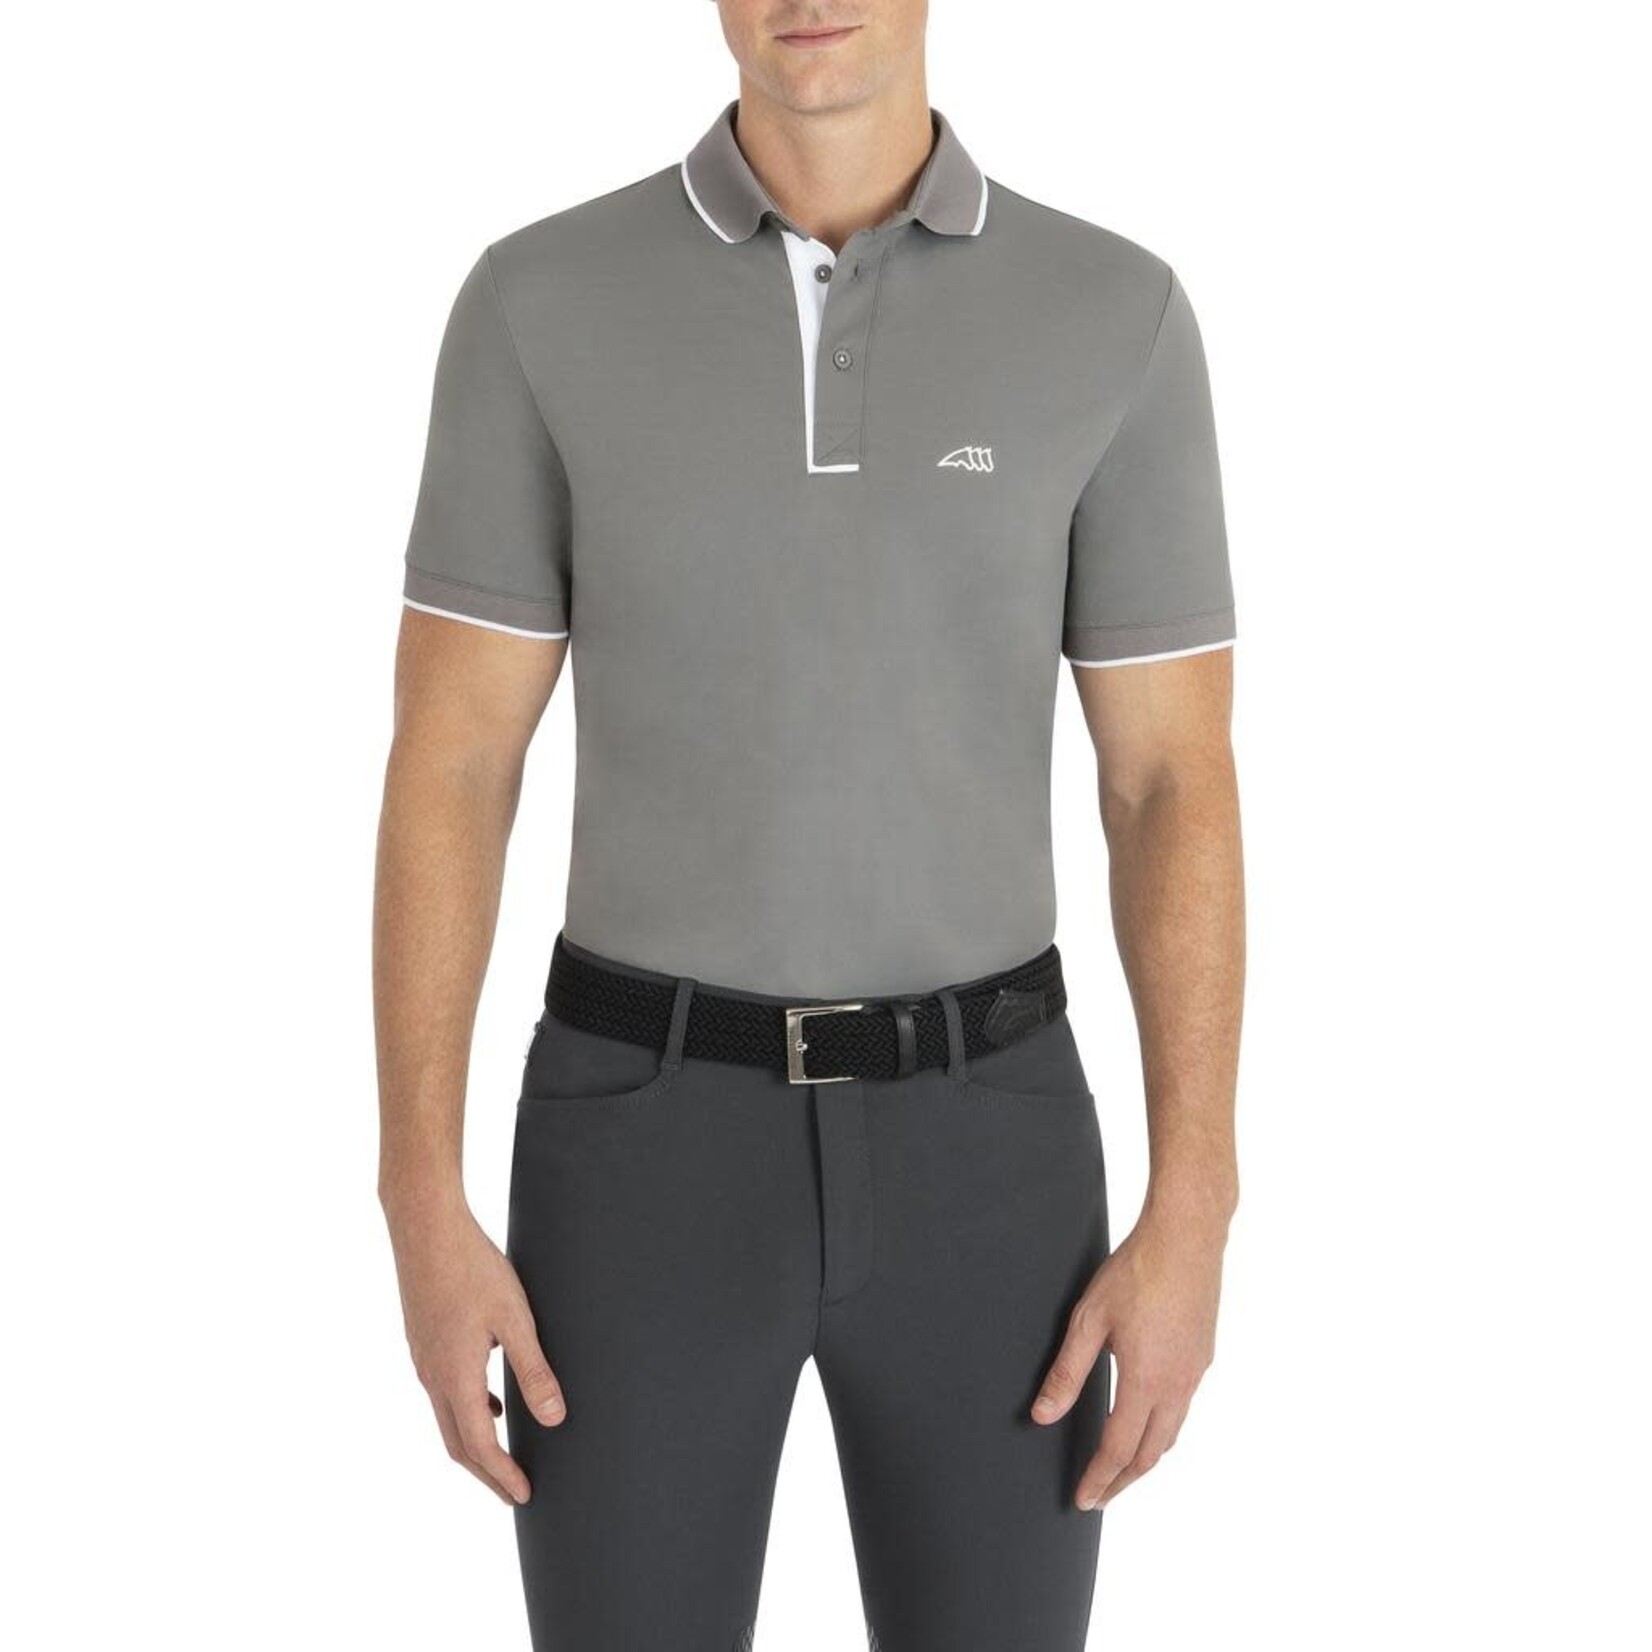 Equiline 214-H00510 Equiline Ezrae Men’s Polo Shirt